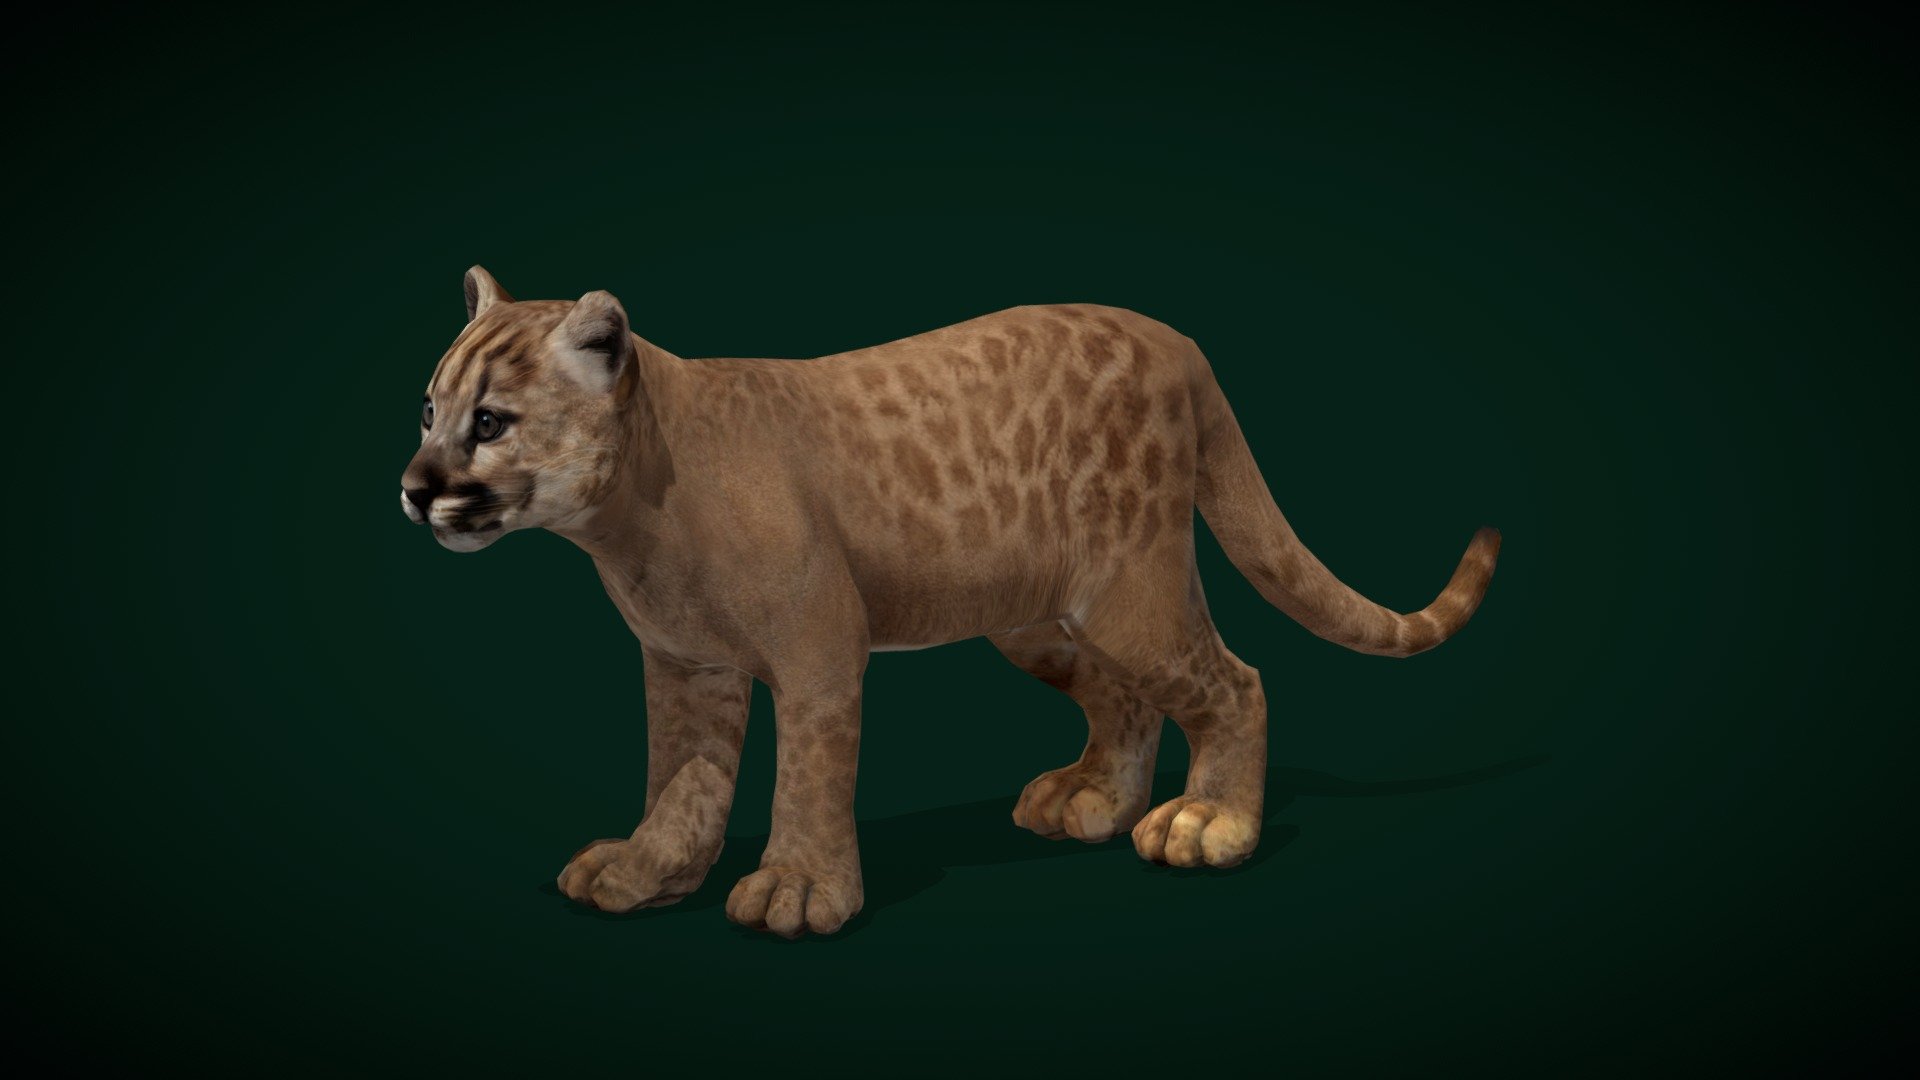 Baby Cougar (Puma)  Mammalia

Puma concolor Animal Mammal ( Mountain Lion ,Catamount) Cougar ,Large Cat

1 Draw Calls

Lowpoly

Game Ready Asset

Subdivision Surface Ready

12  Animations

4K PBR Textures Materials

Unreal FBX (Unreal 4,5 Plus)

Unity FBX

Blend File 3.6.5 LTS

USDZ File (AR Ready). Real Scale Dimension (Xcode ,Reality Composer, Keynote Ready)

Textures Files

GLB File (Unreal 5.1 Plus Native Support)

Gltf File ( Spark AR, Lens Studio(SnapChat) , Effector(Tiktok) , Spline, Play Canvas,Omiverse ) Compatible

Triangles -5430   

Faces -3217

Edges -6018

Vertices -2826

Diffuse, Metallic, Roughness , Normal Map ,Specular Map,AO
The cougar, also known as the puma, mountain lion, catamount, or panther, is a large cat native to the Americas, second in size only to the stockier jaguar. They are not technically grouped with the “true” big cats, as they are slightly smaller than other big cats, and they lack the vocal physiology to roar 3d model